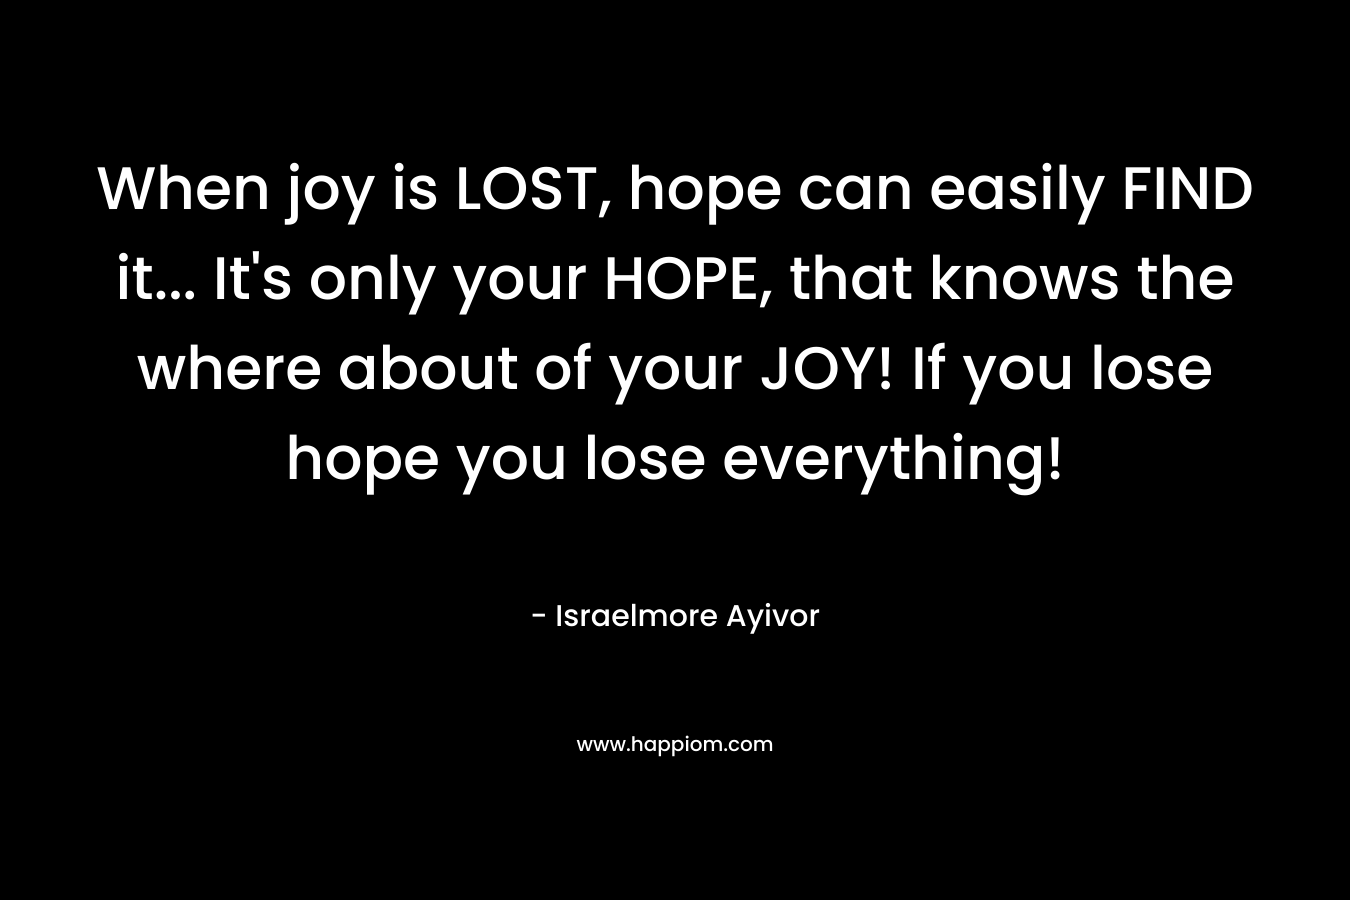 When joy is LOST, hope can easily FIND it... It's only your HOPE, that knows the where about of your JOY! If you lose hope you lose everything!